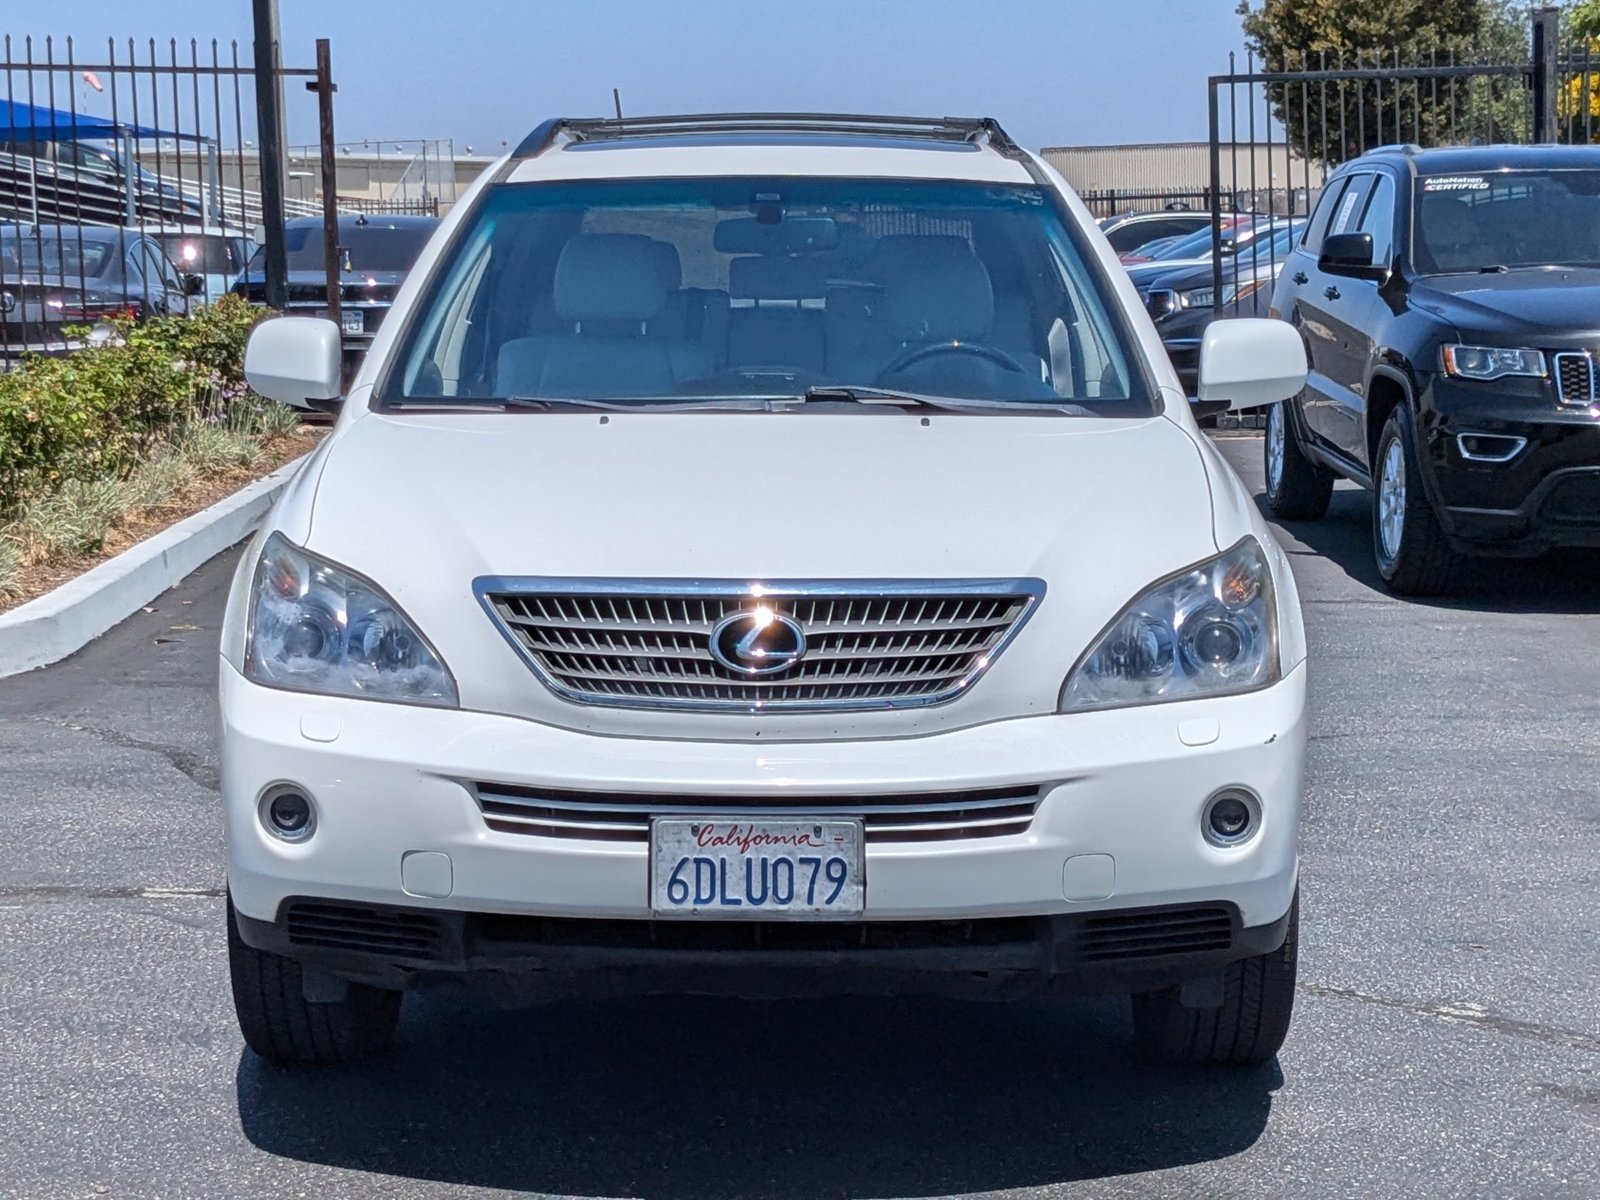 Used 2008 Lexus RX 400h with VIN JTJHW31U482853454 for sale in Torrance, CA